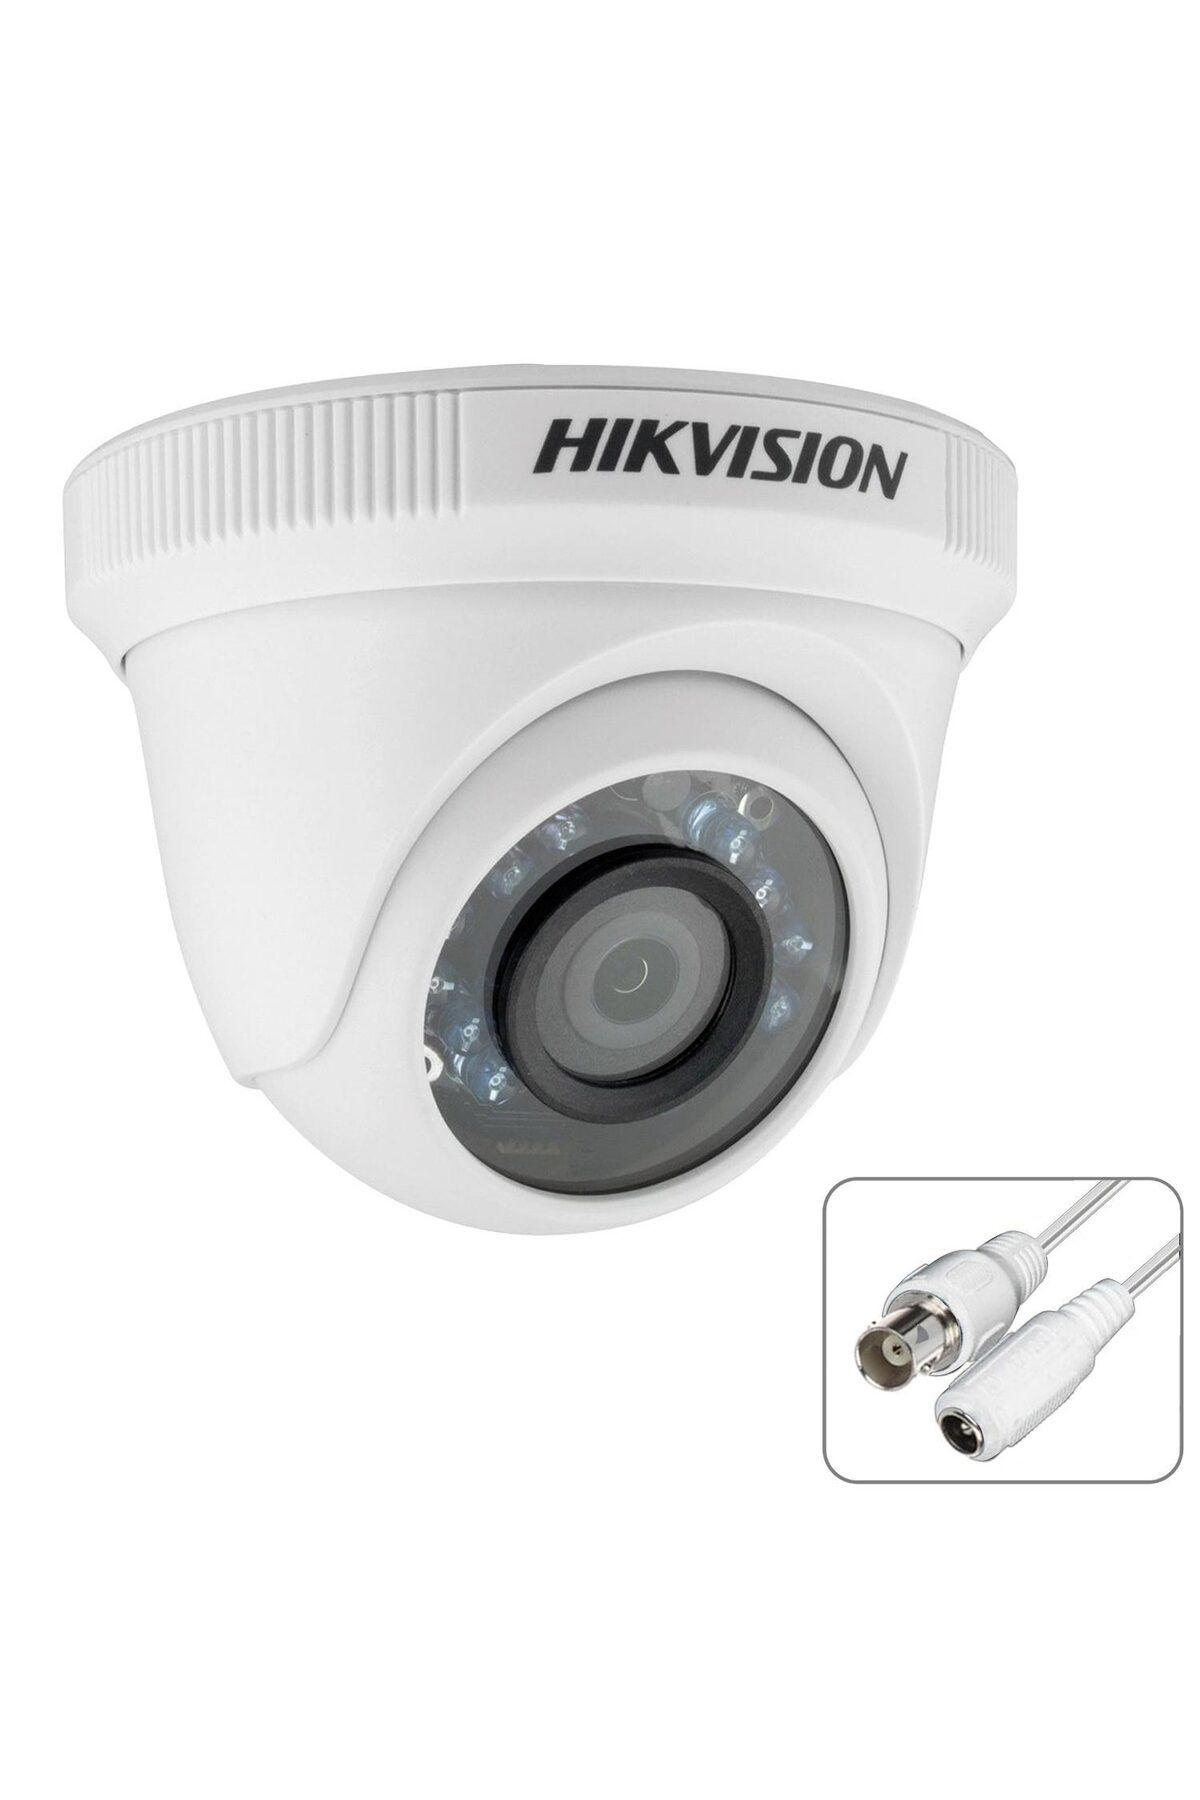 Hikvision DS-2CE56D0T-IRPF Dome Ahd Kamera 2mp 2.8mm